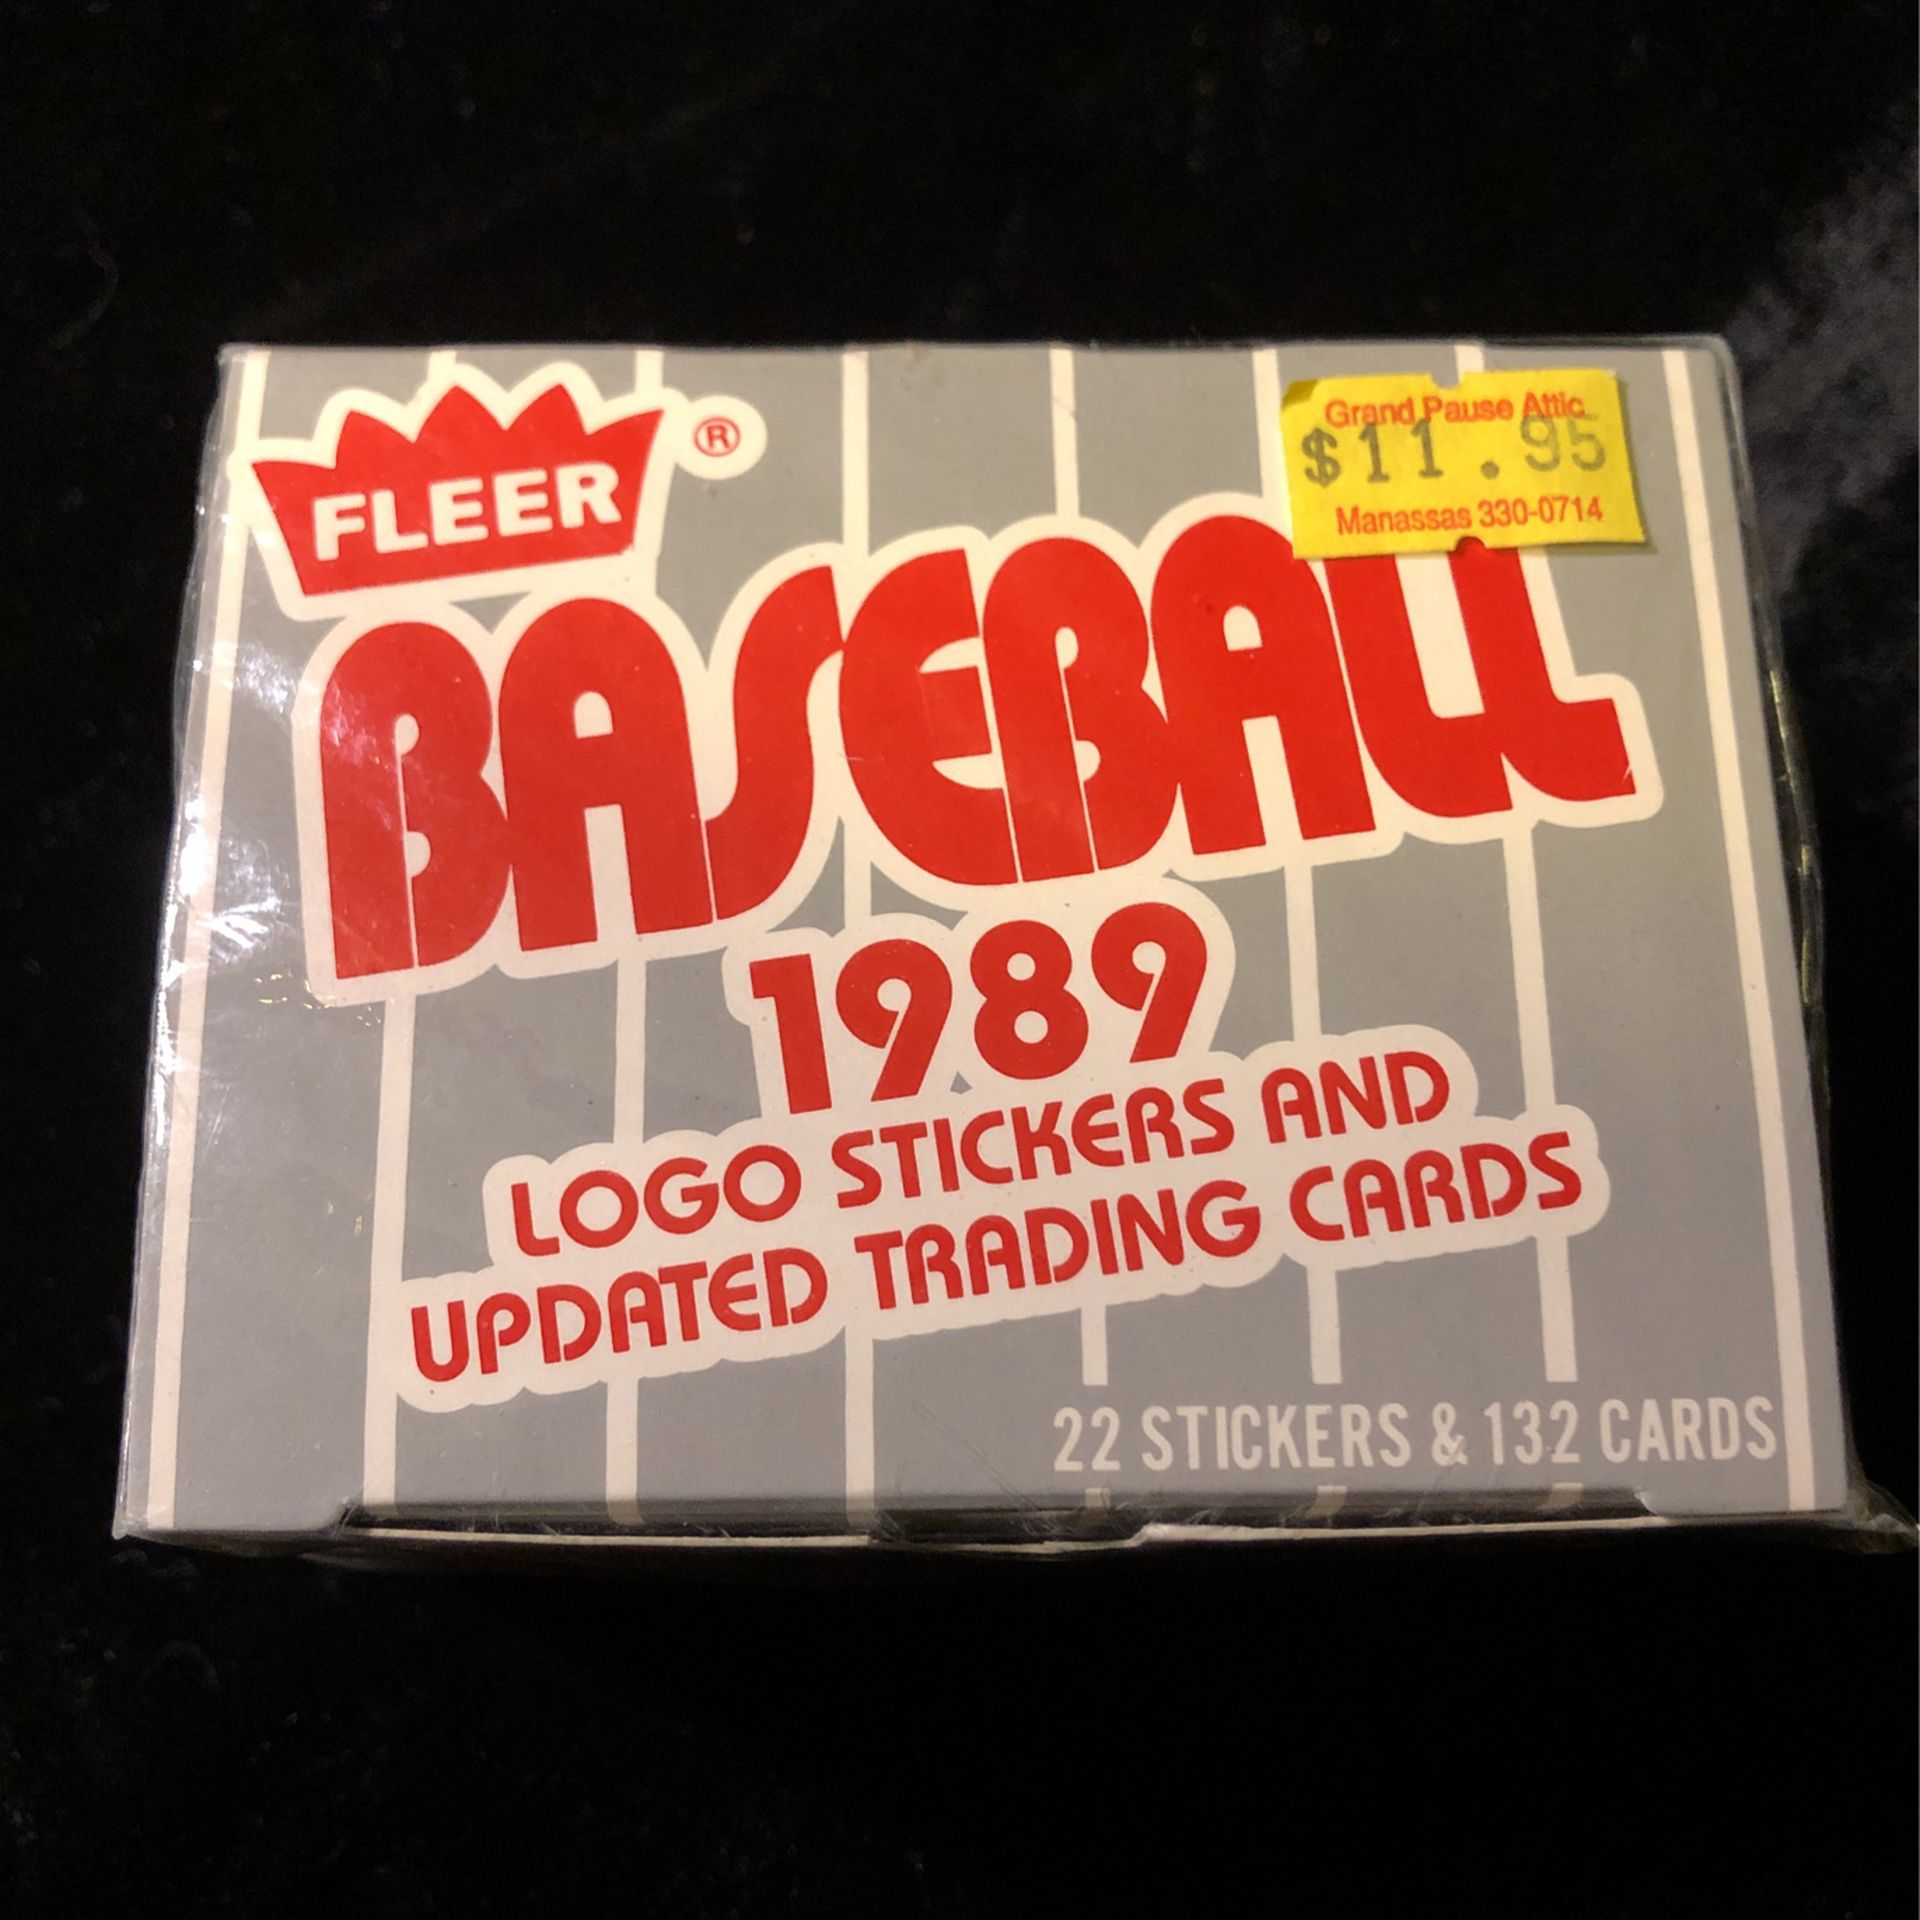 1989 Fleer Baseball Logo Stickers And Update Cards